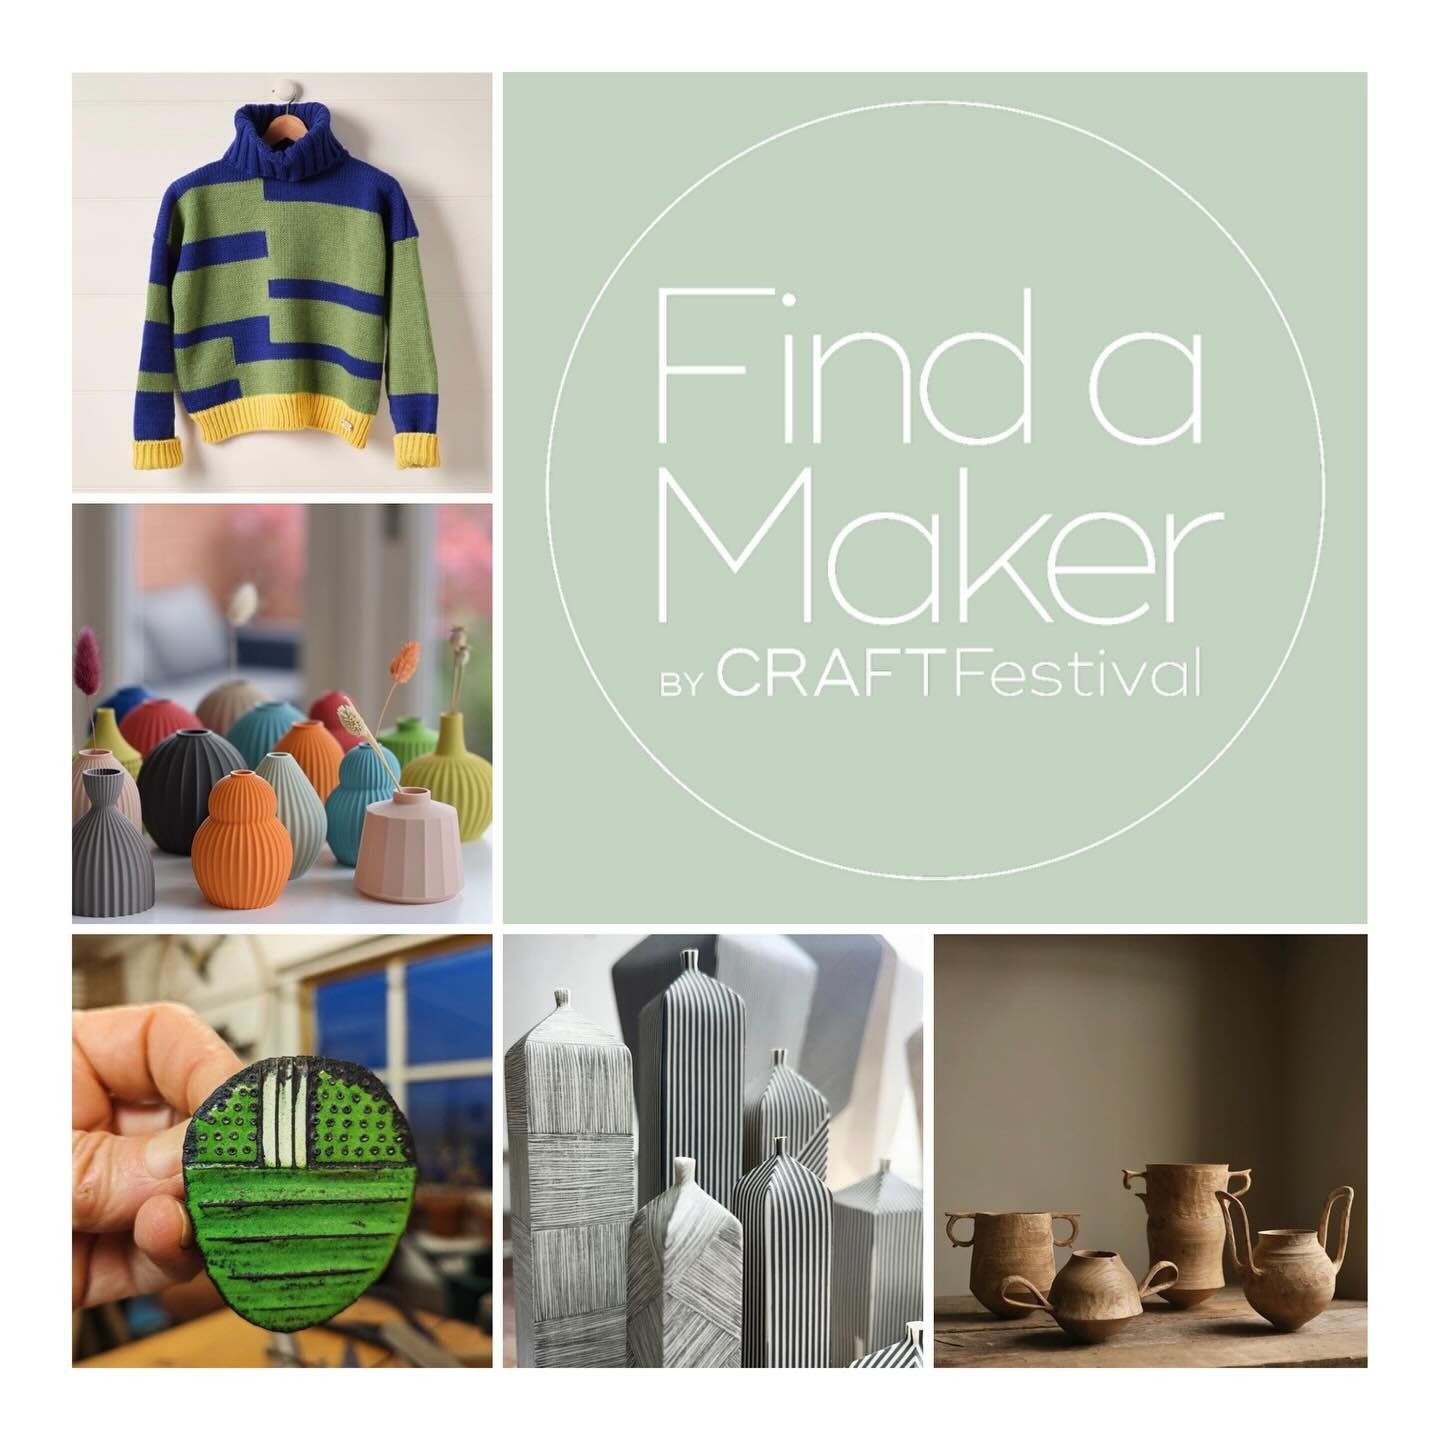 It&rsquo;s late on Friday night and I am laid up with bad neck pain but it&rsquo;s the last day of @find.amaker week and I&rsquo;m determined to finish!
I had great fun going through the website browsing all the makers - some new to me and some I&rsq